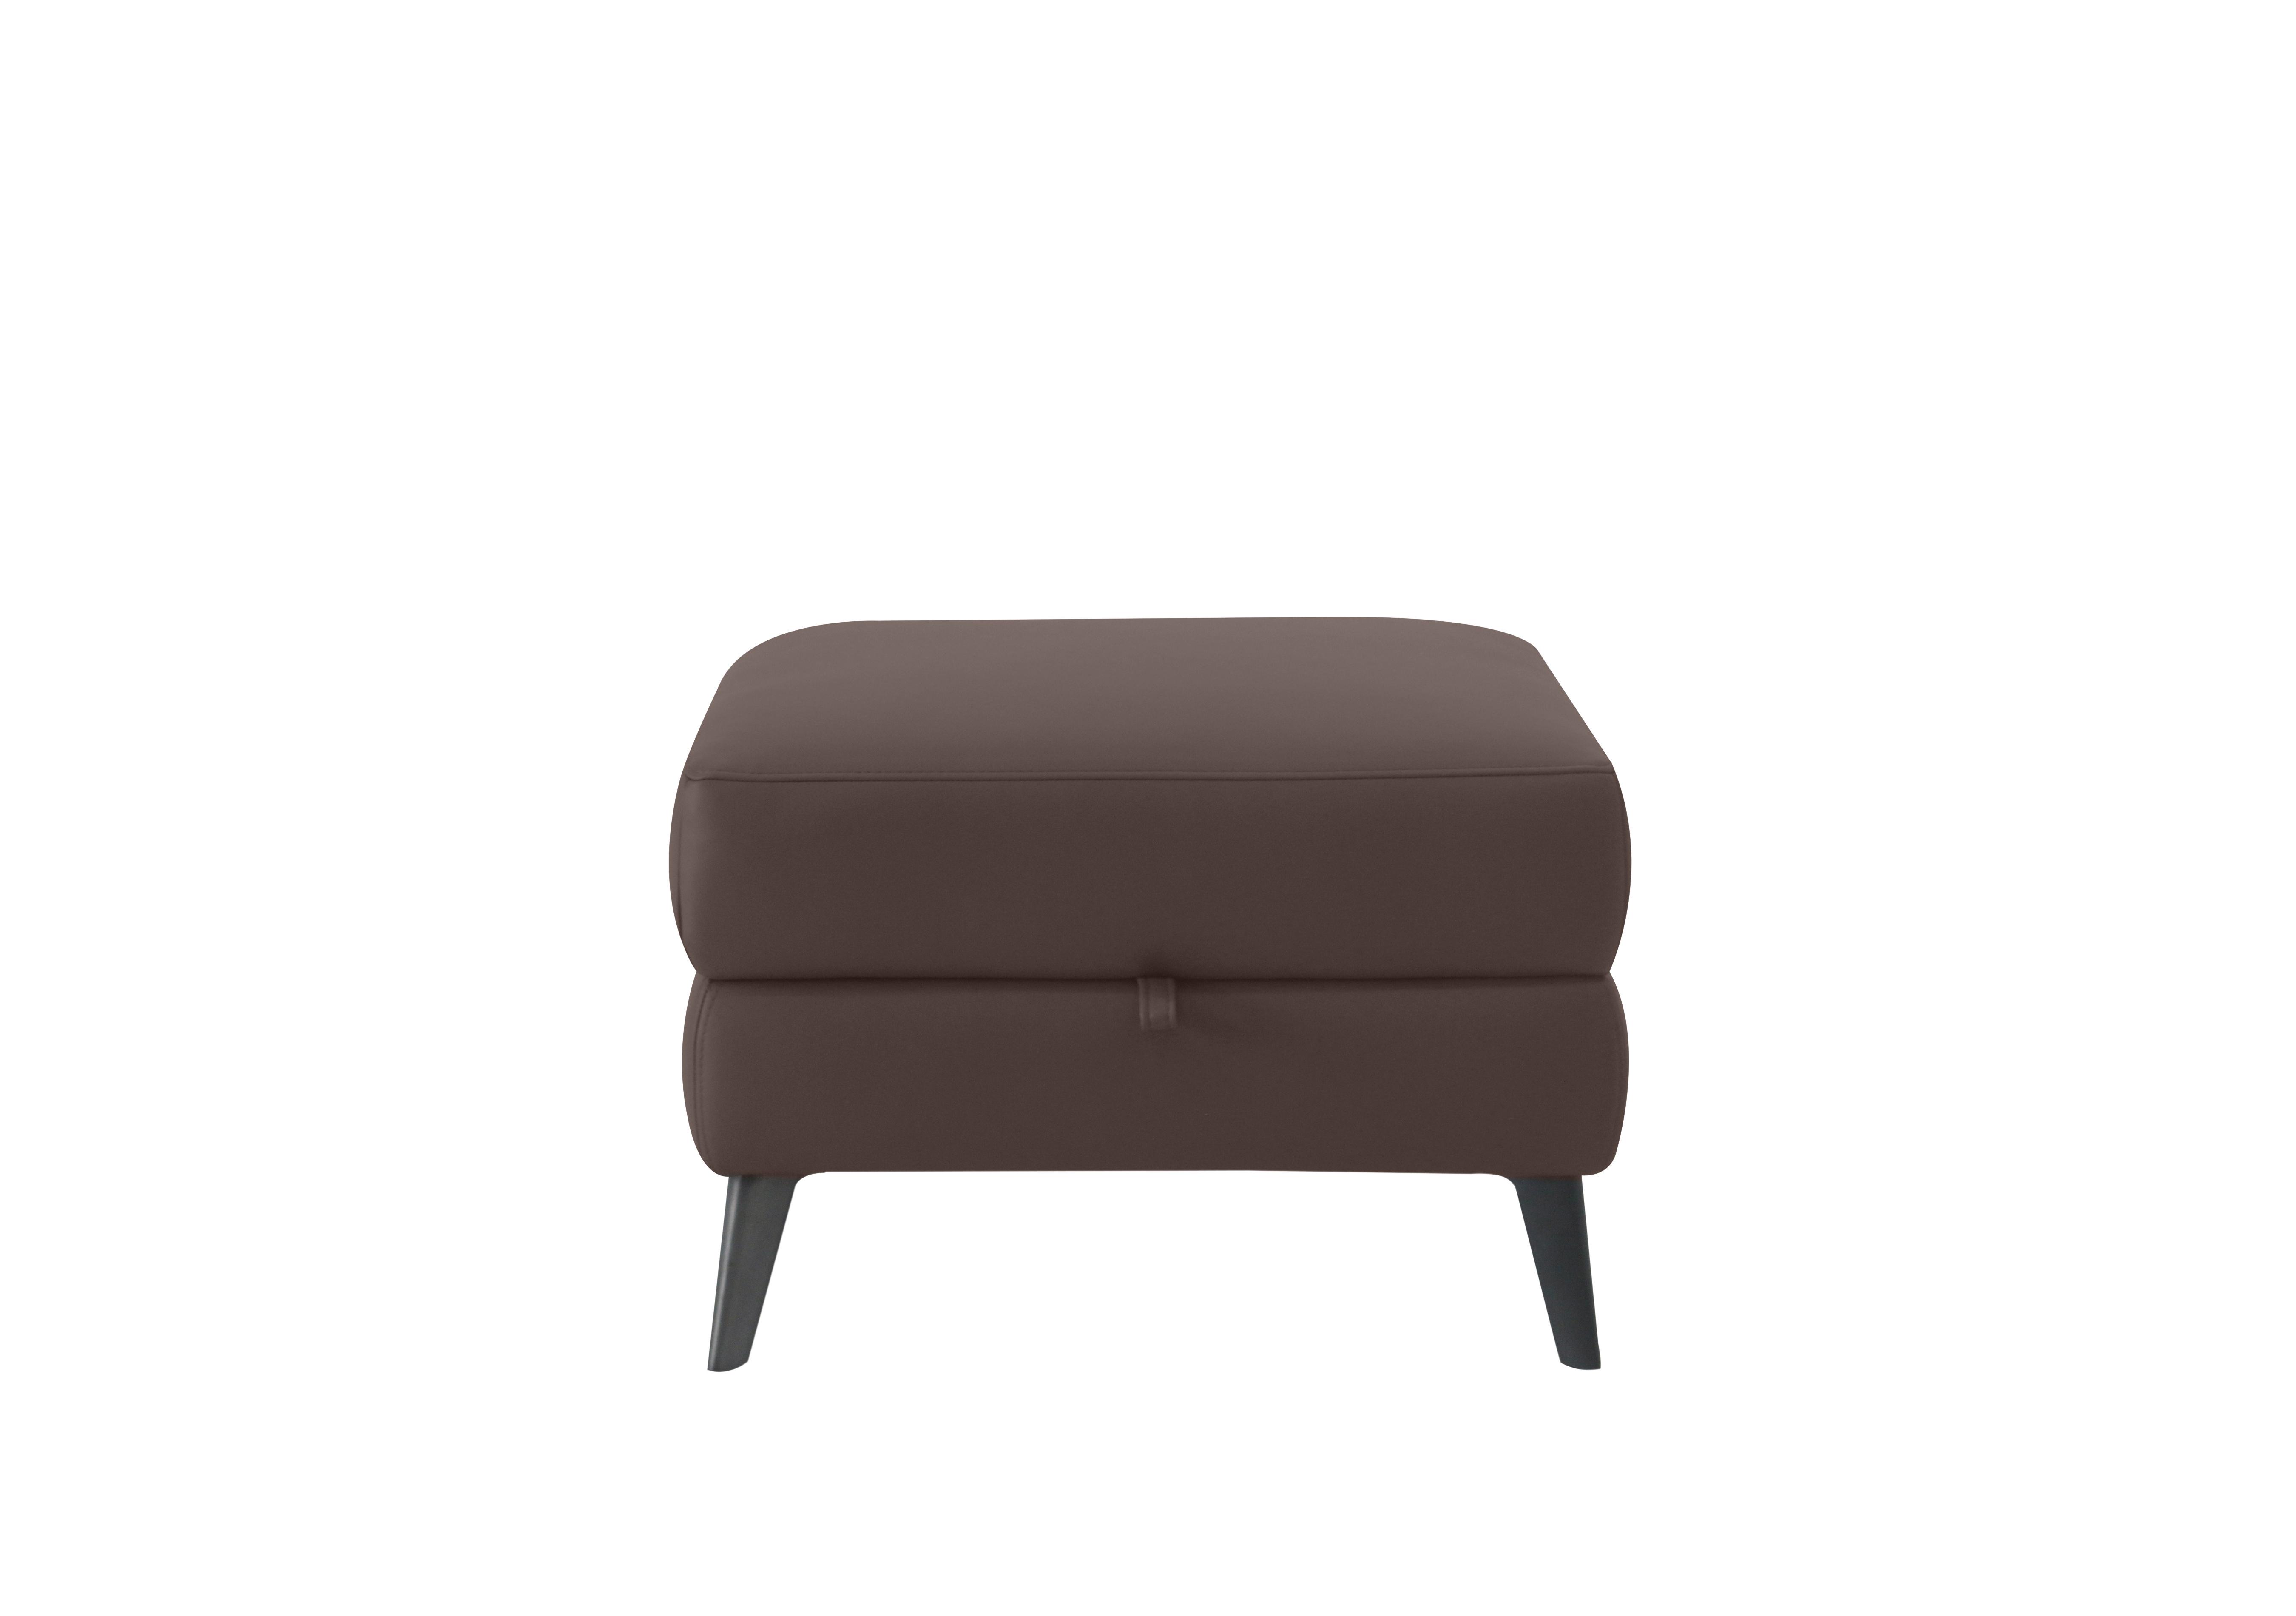 Huxley Leather Storage Footstool in Nn-512e Cacao Brown on Furniture Village